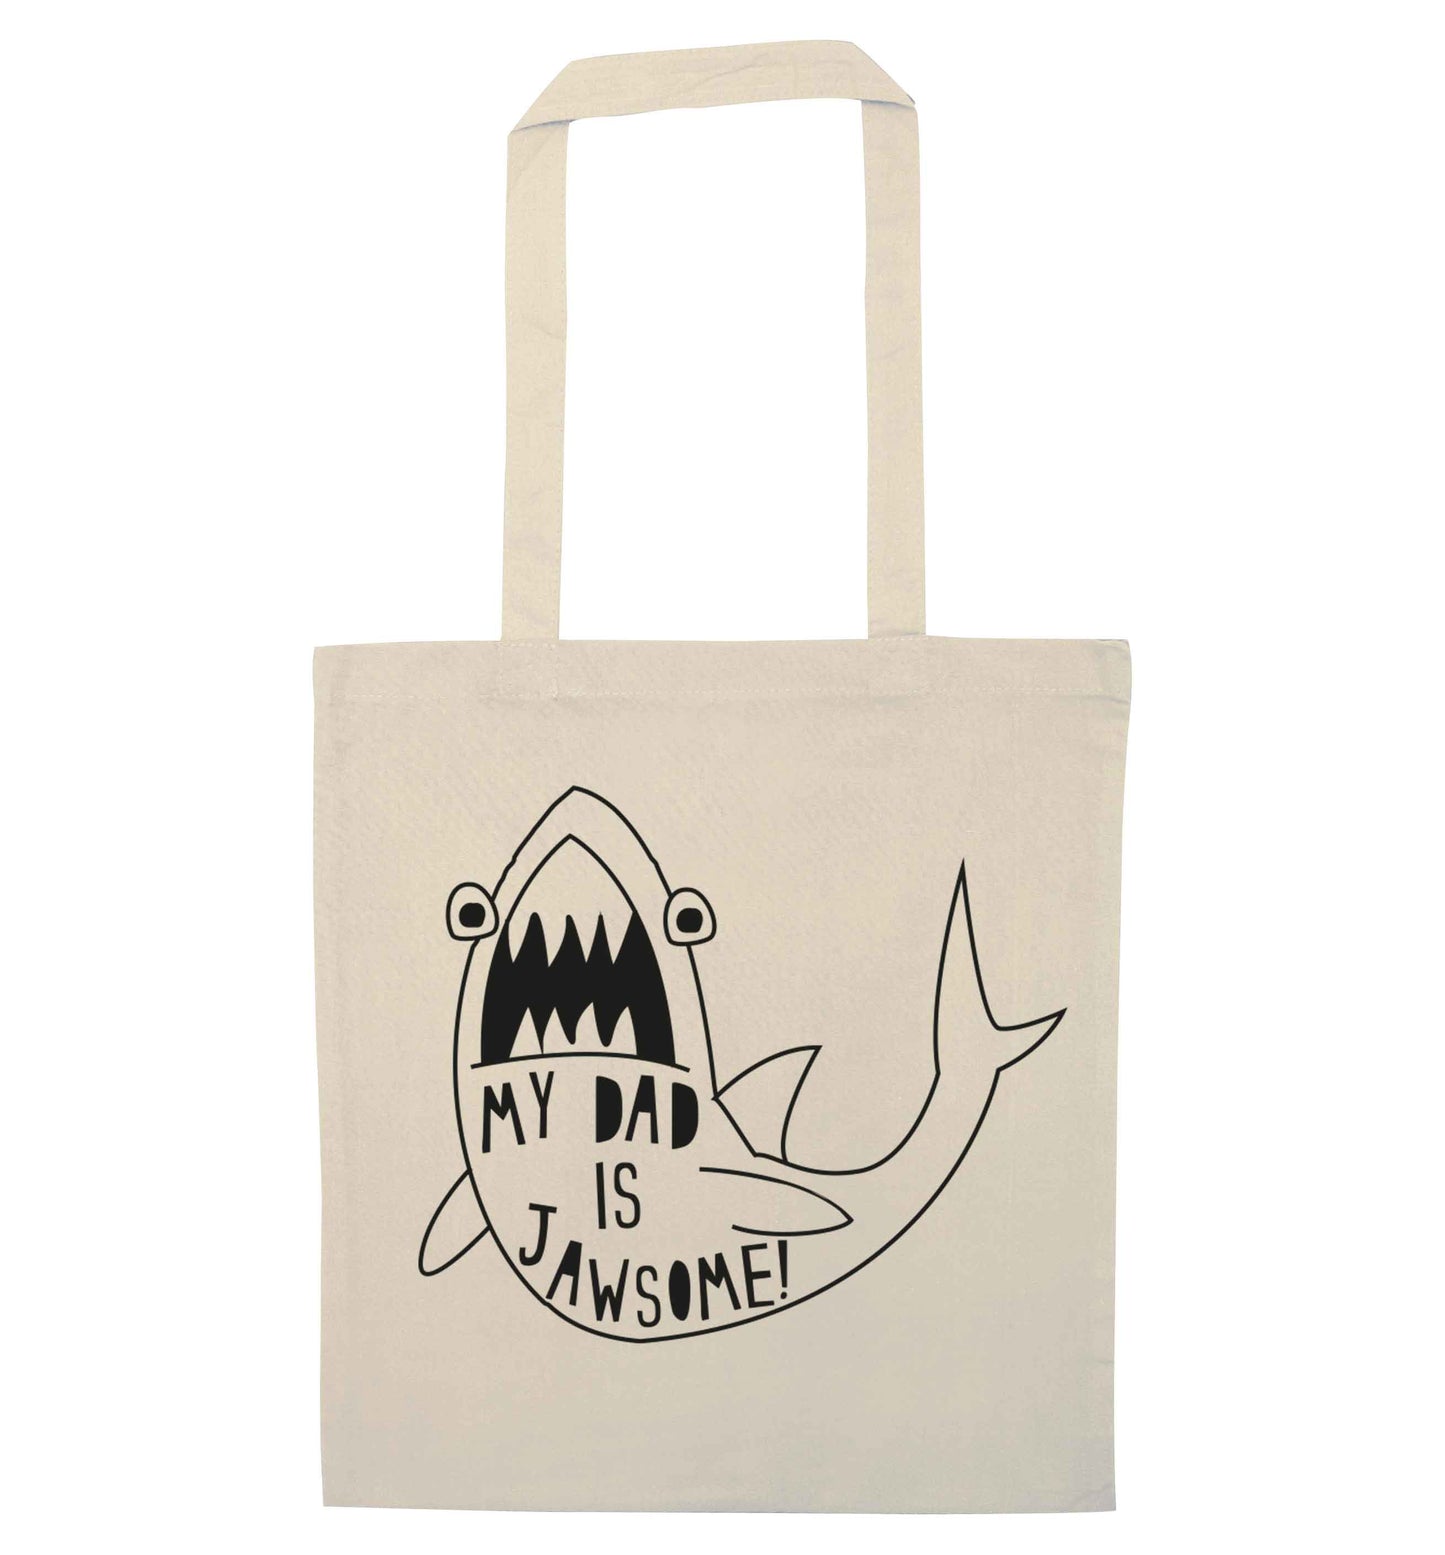 My Dad is jawsome natural tote bag